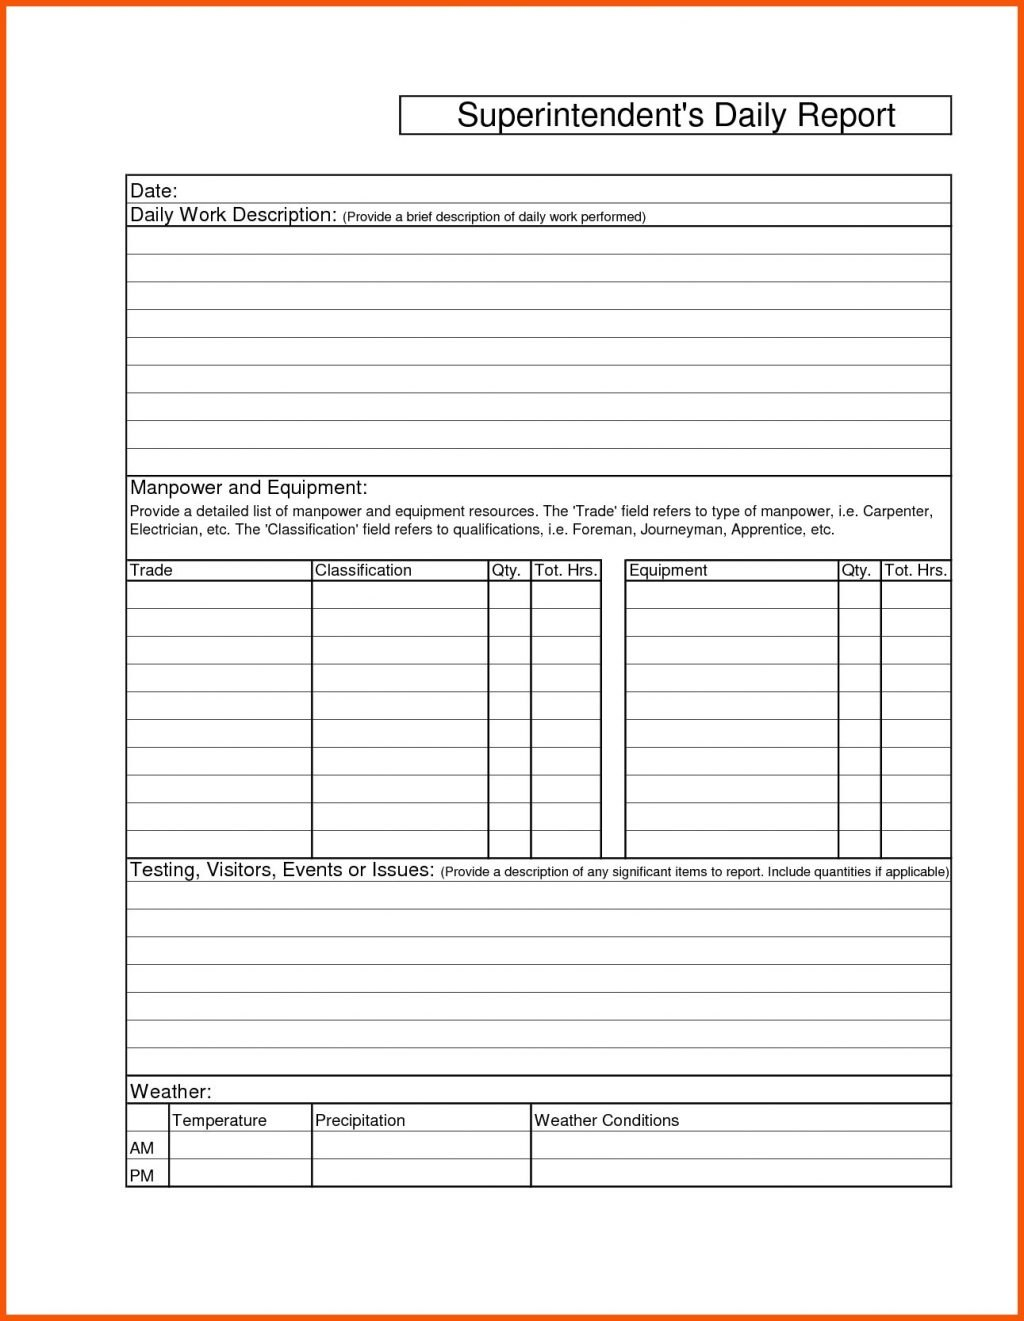 Construction Daily Report Template For Progress Format In Project within Superintendent Daily Report Template